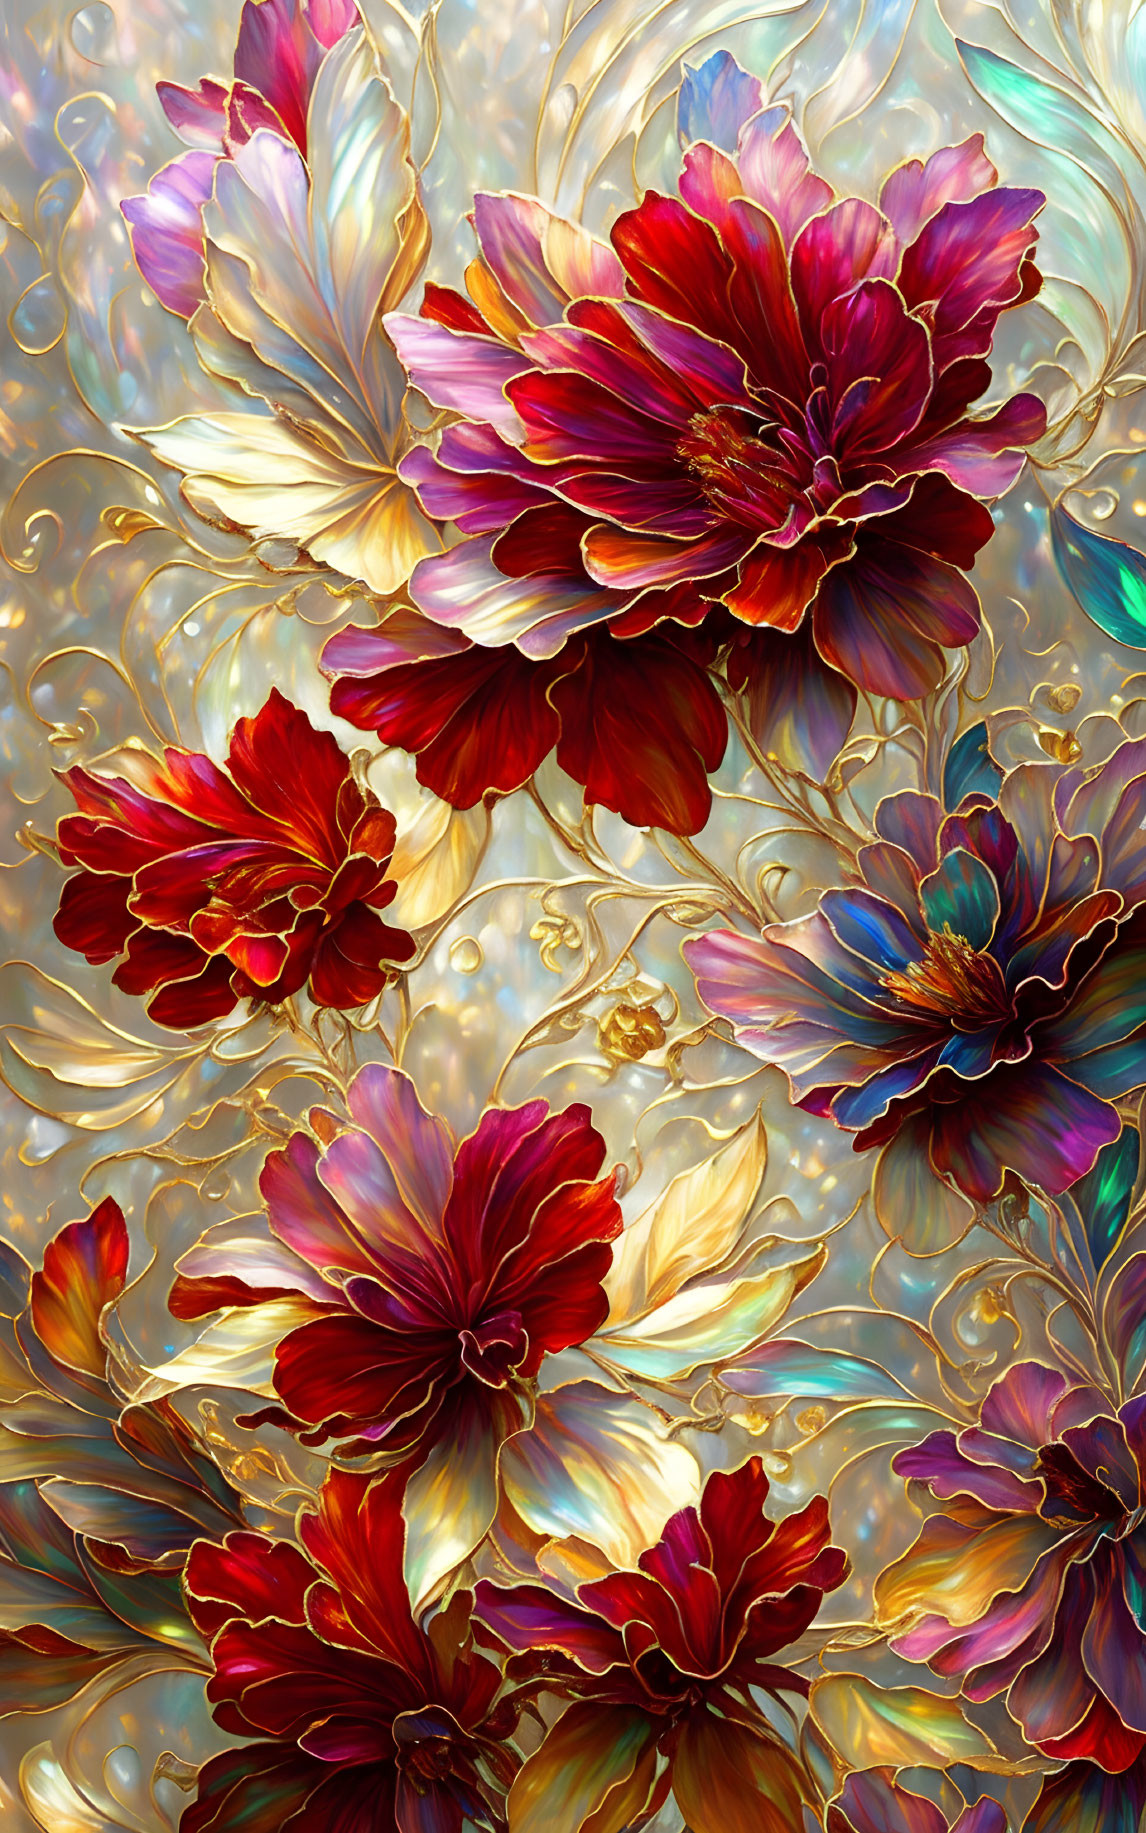 Iridescent Flower Digital Art with Gold Accents